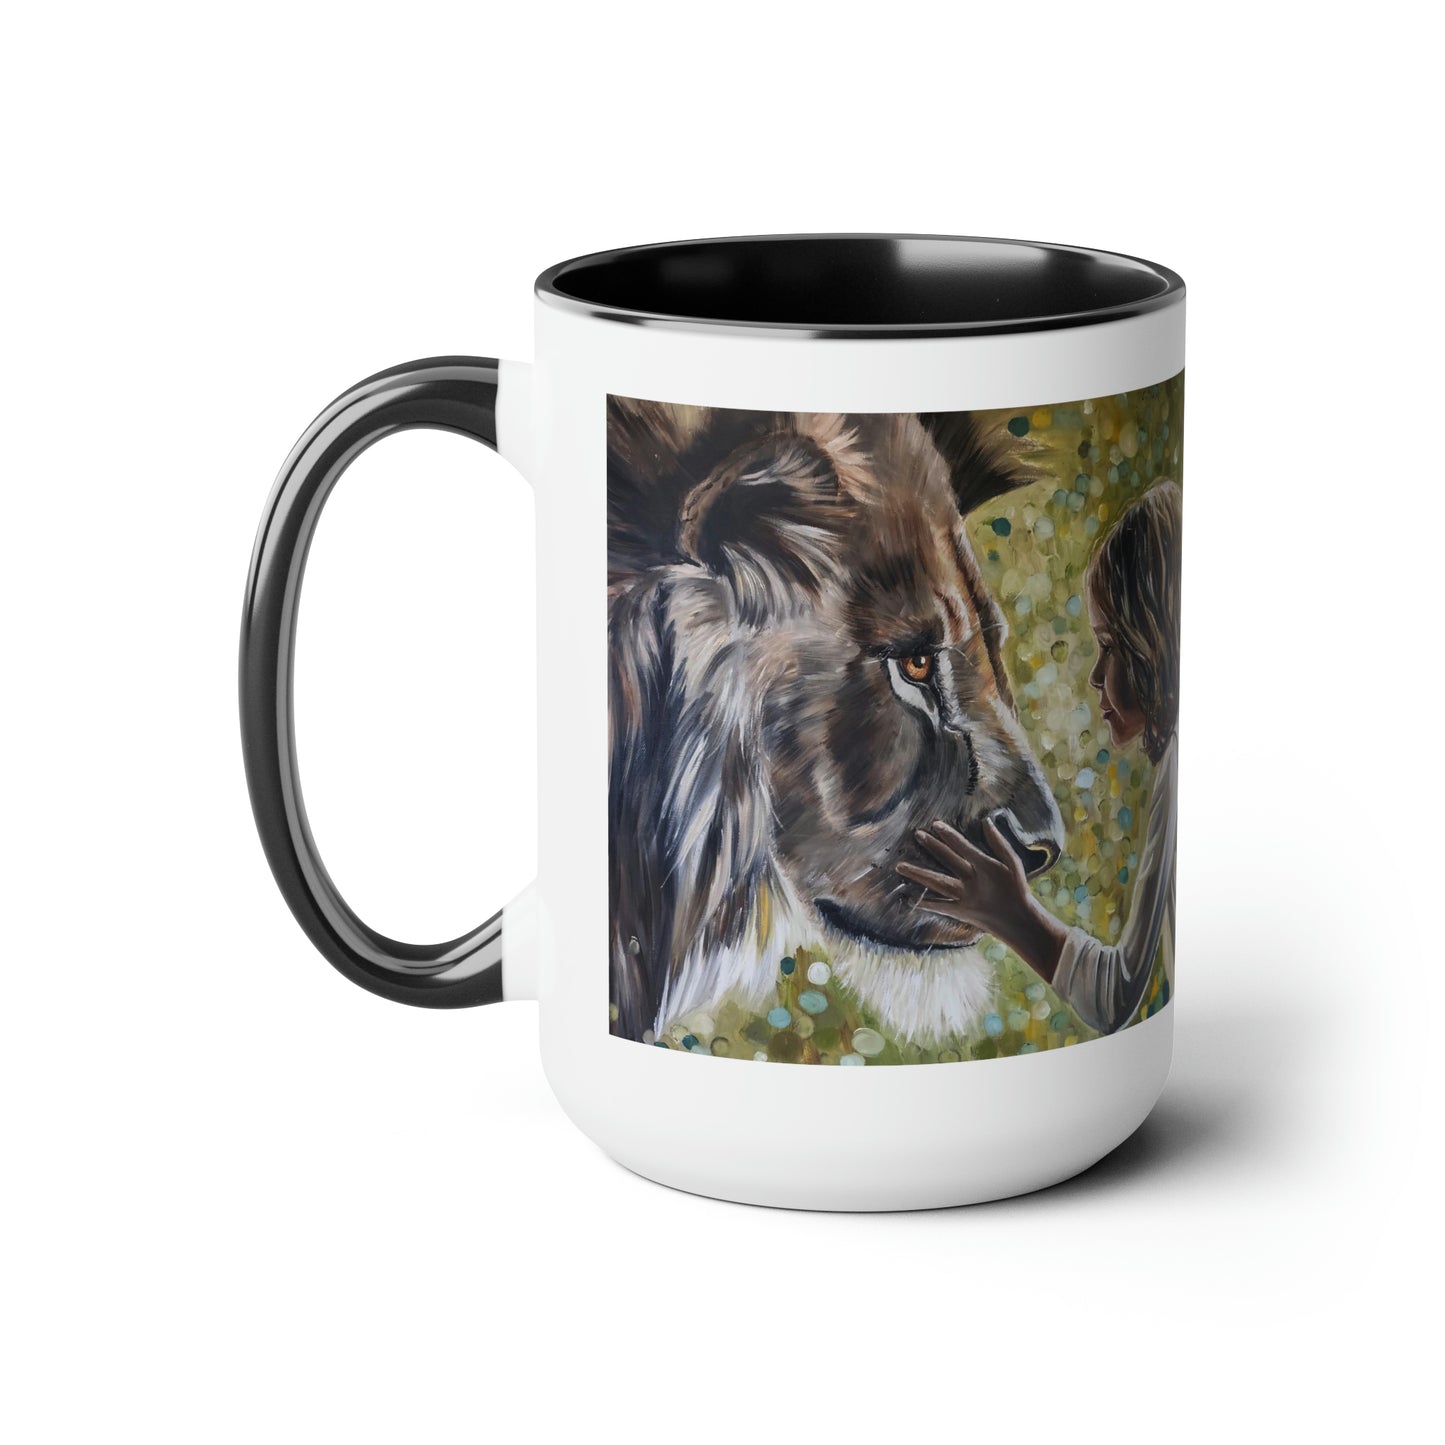 To Look into Your Eyes Two-Tone Coffee Mugs, 15oz